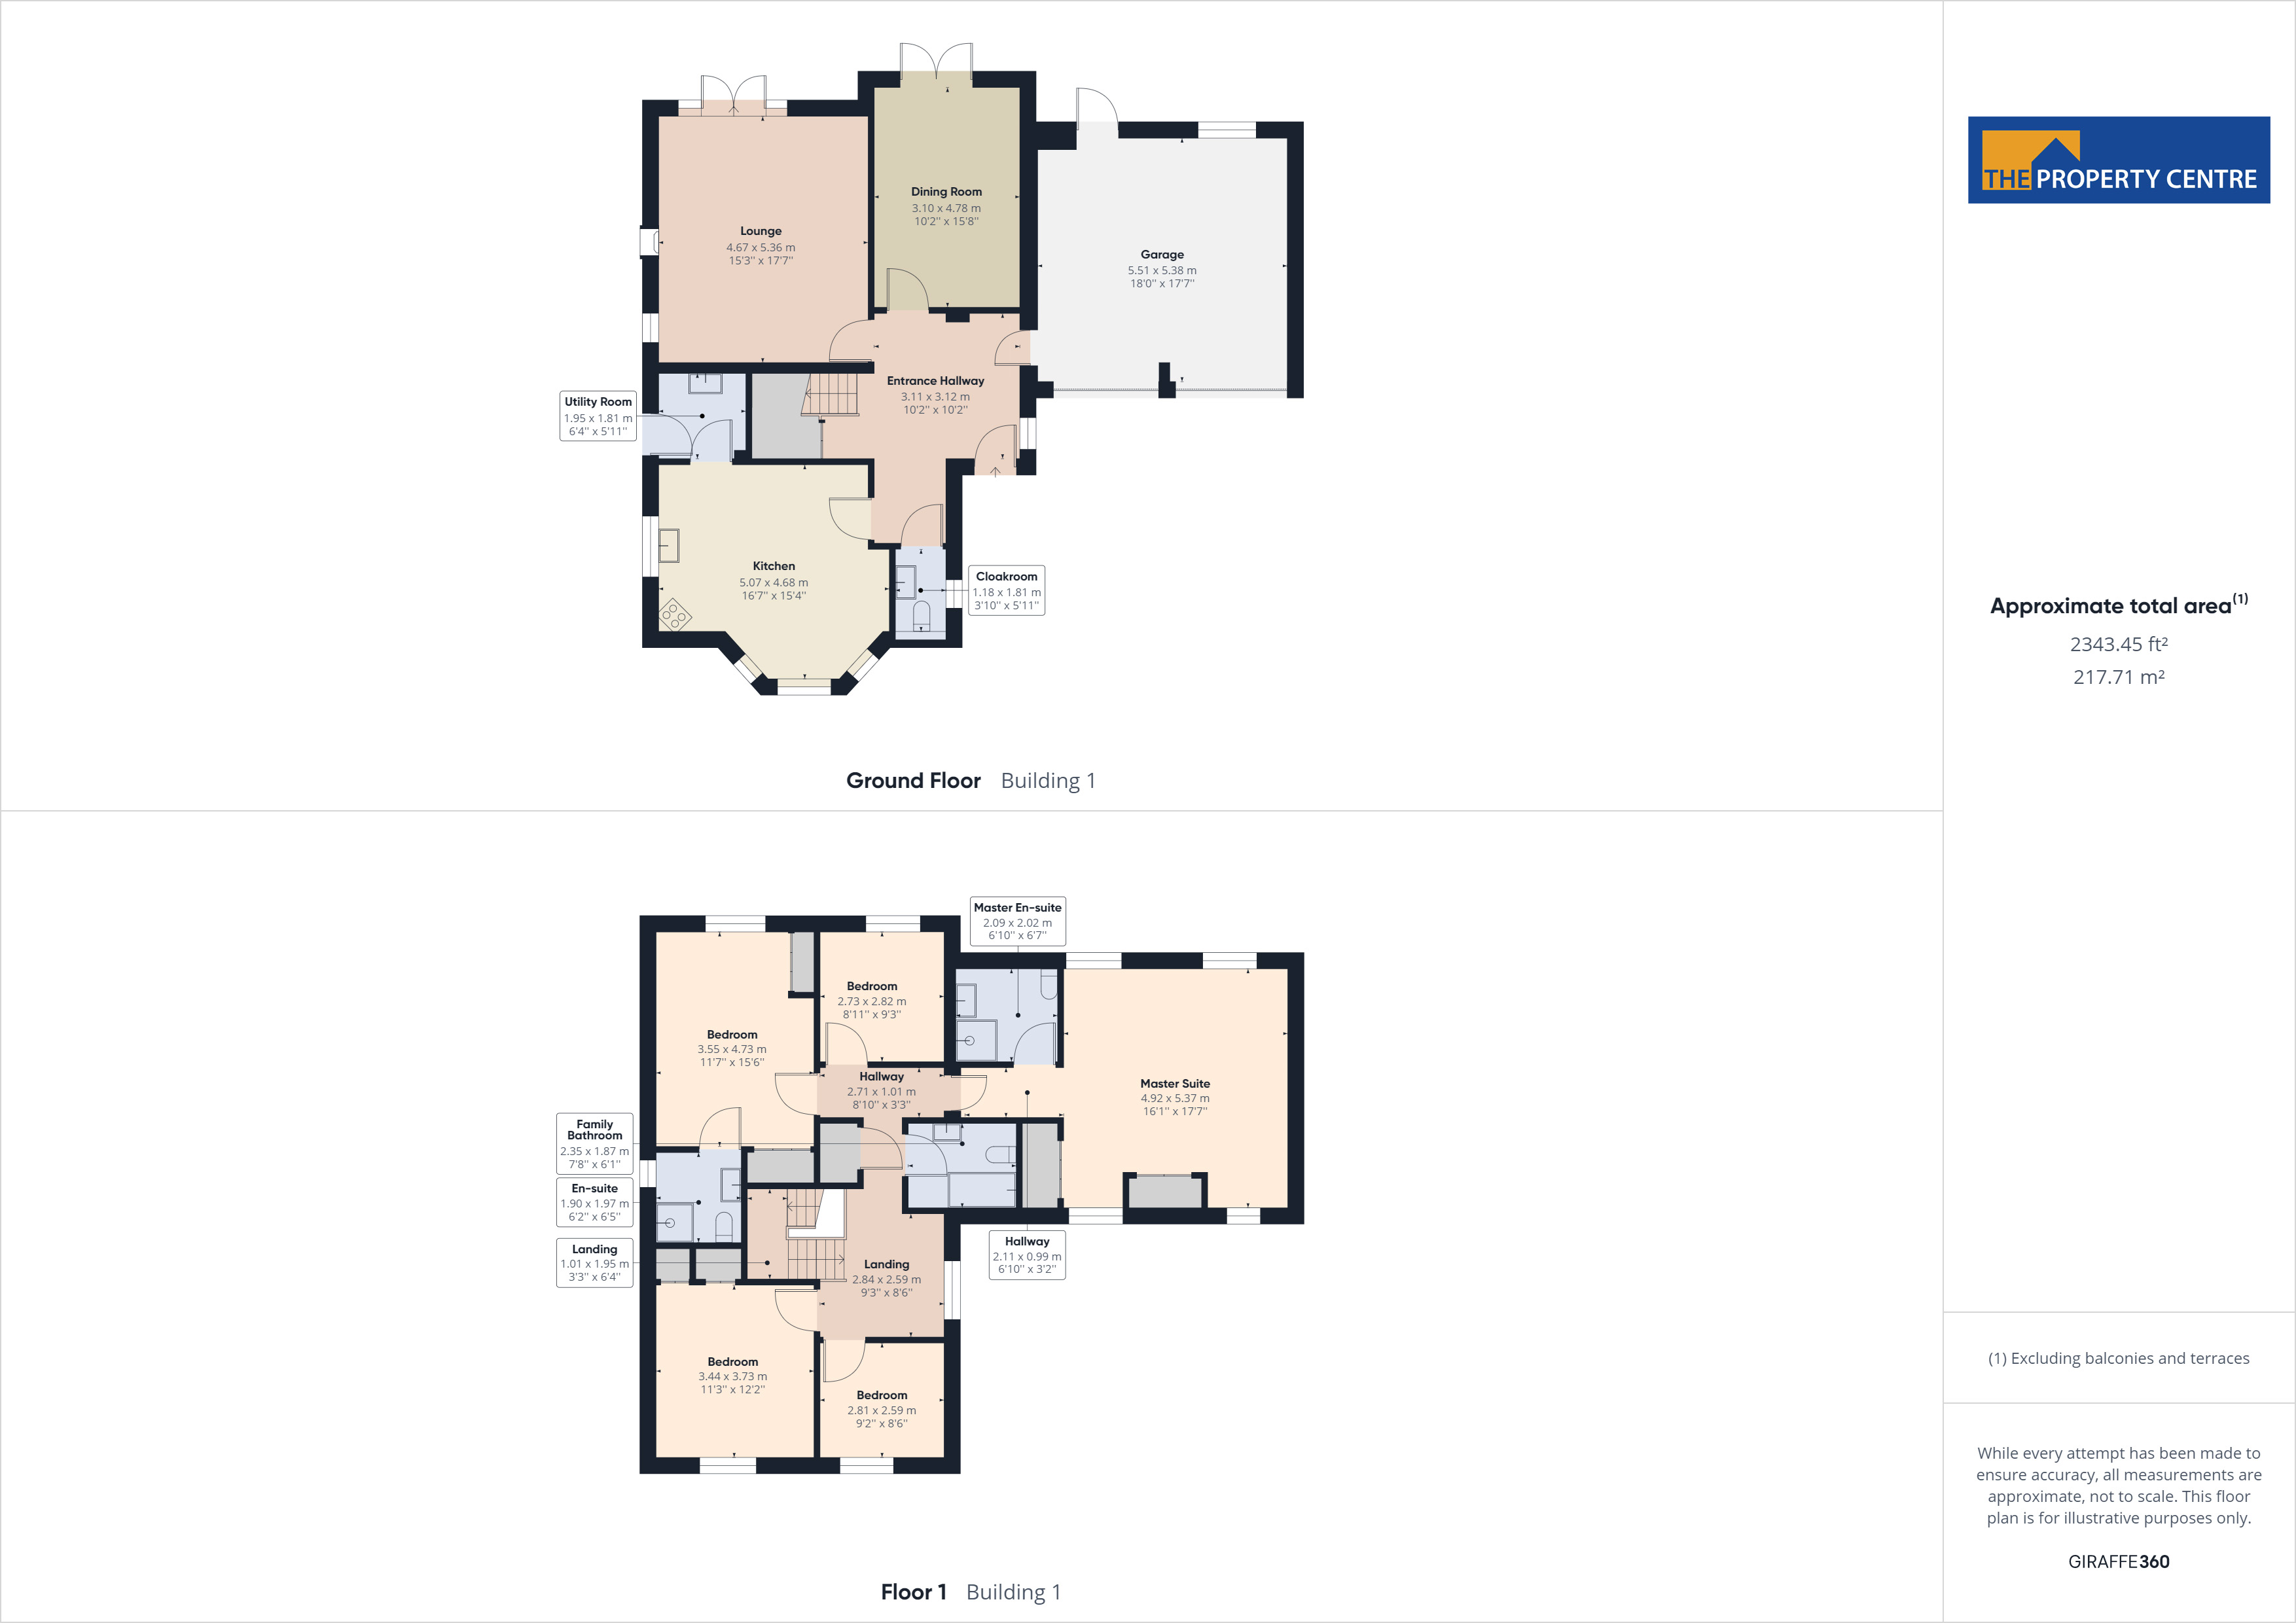 Floor plans by The Property Centre